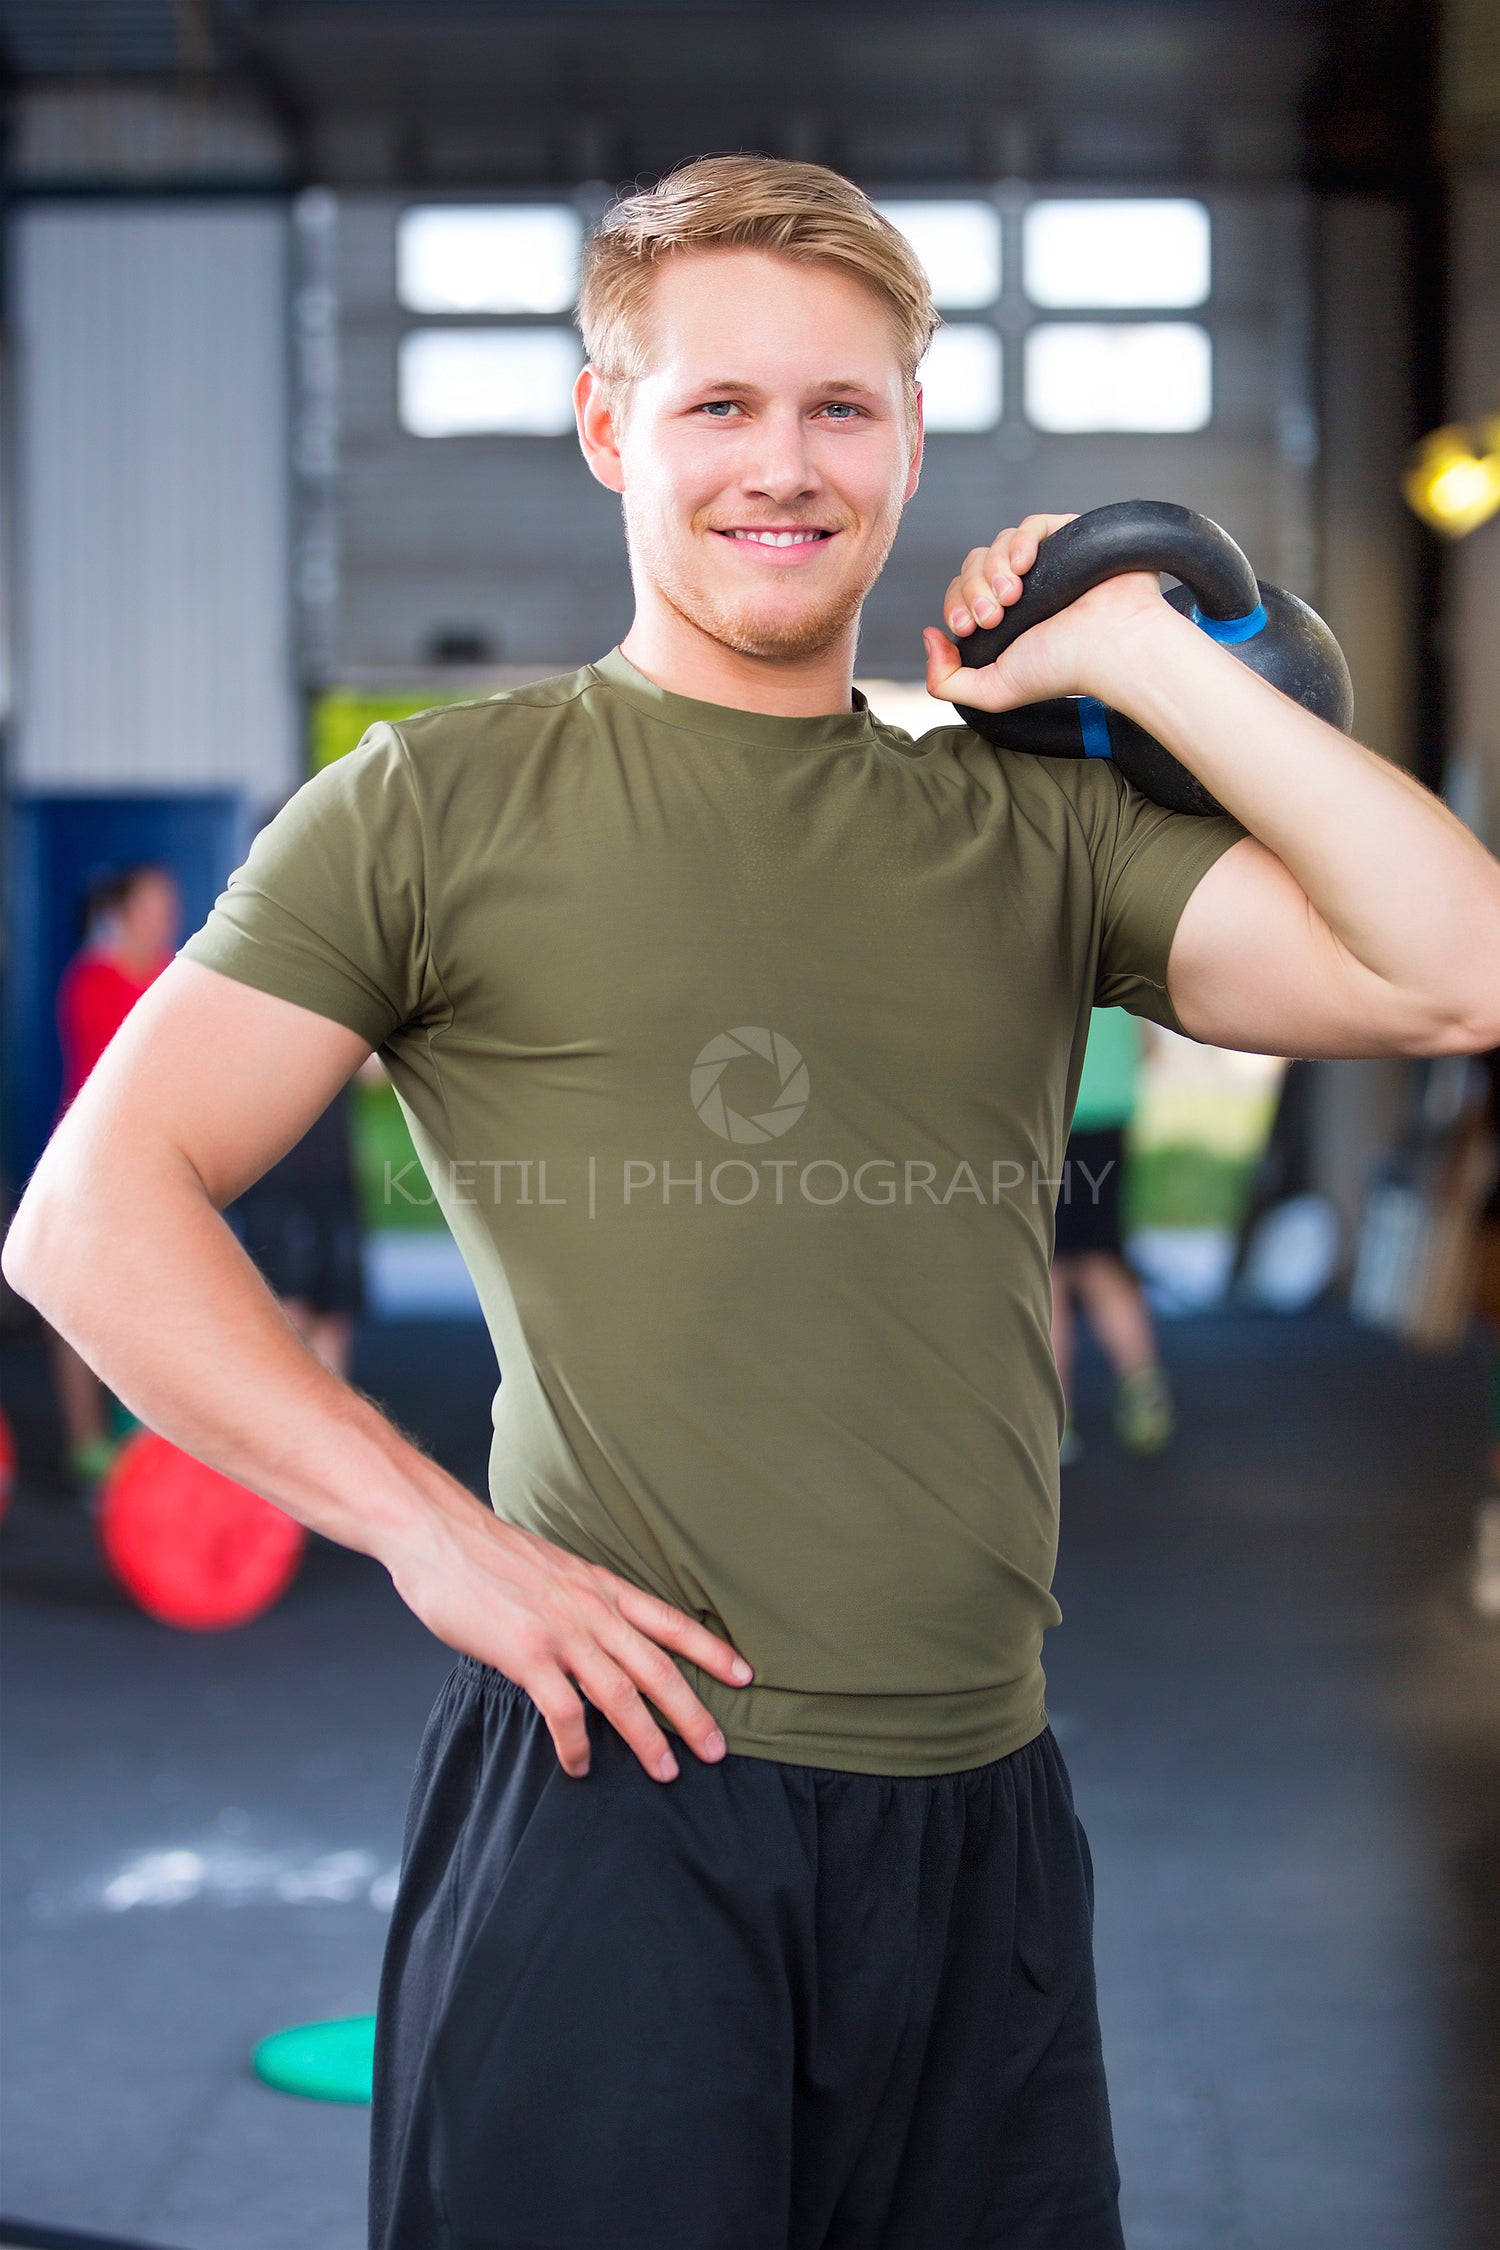 Confident Fit Male Athlete Holding Kettlebell In Health Club